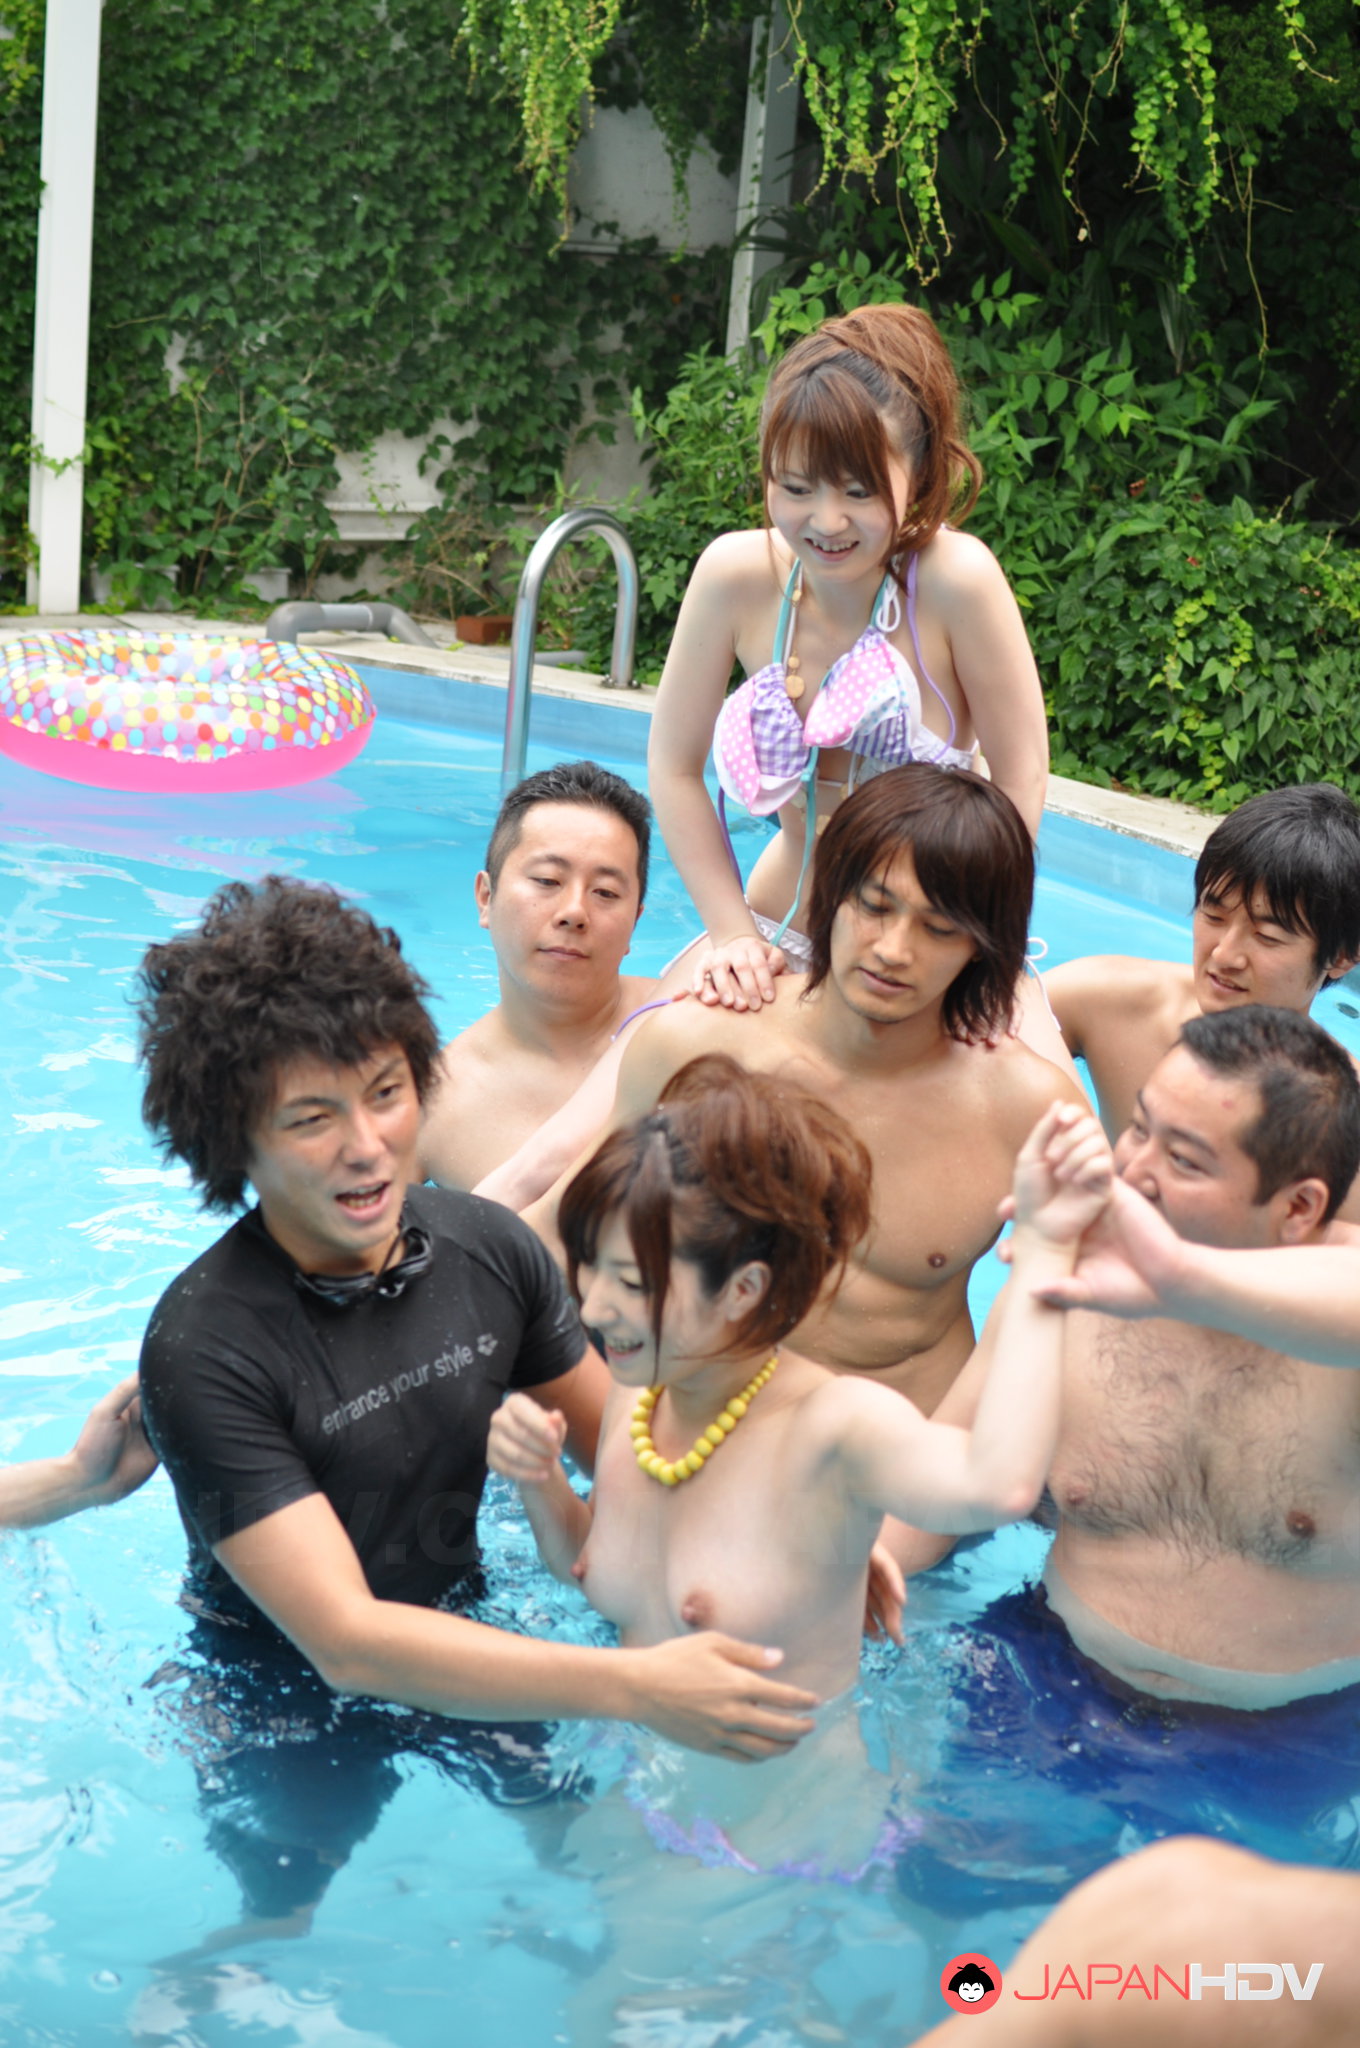 Pussy Pool Party - Japanese girls enjoy in some sexy pool party